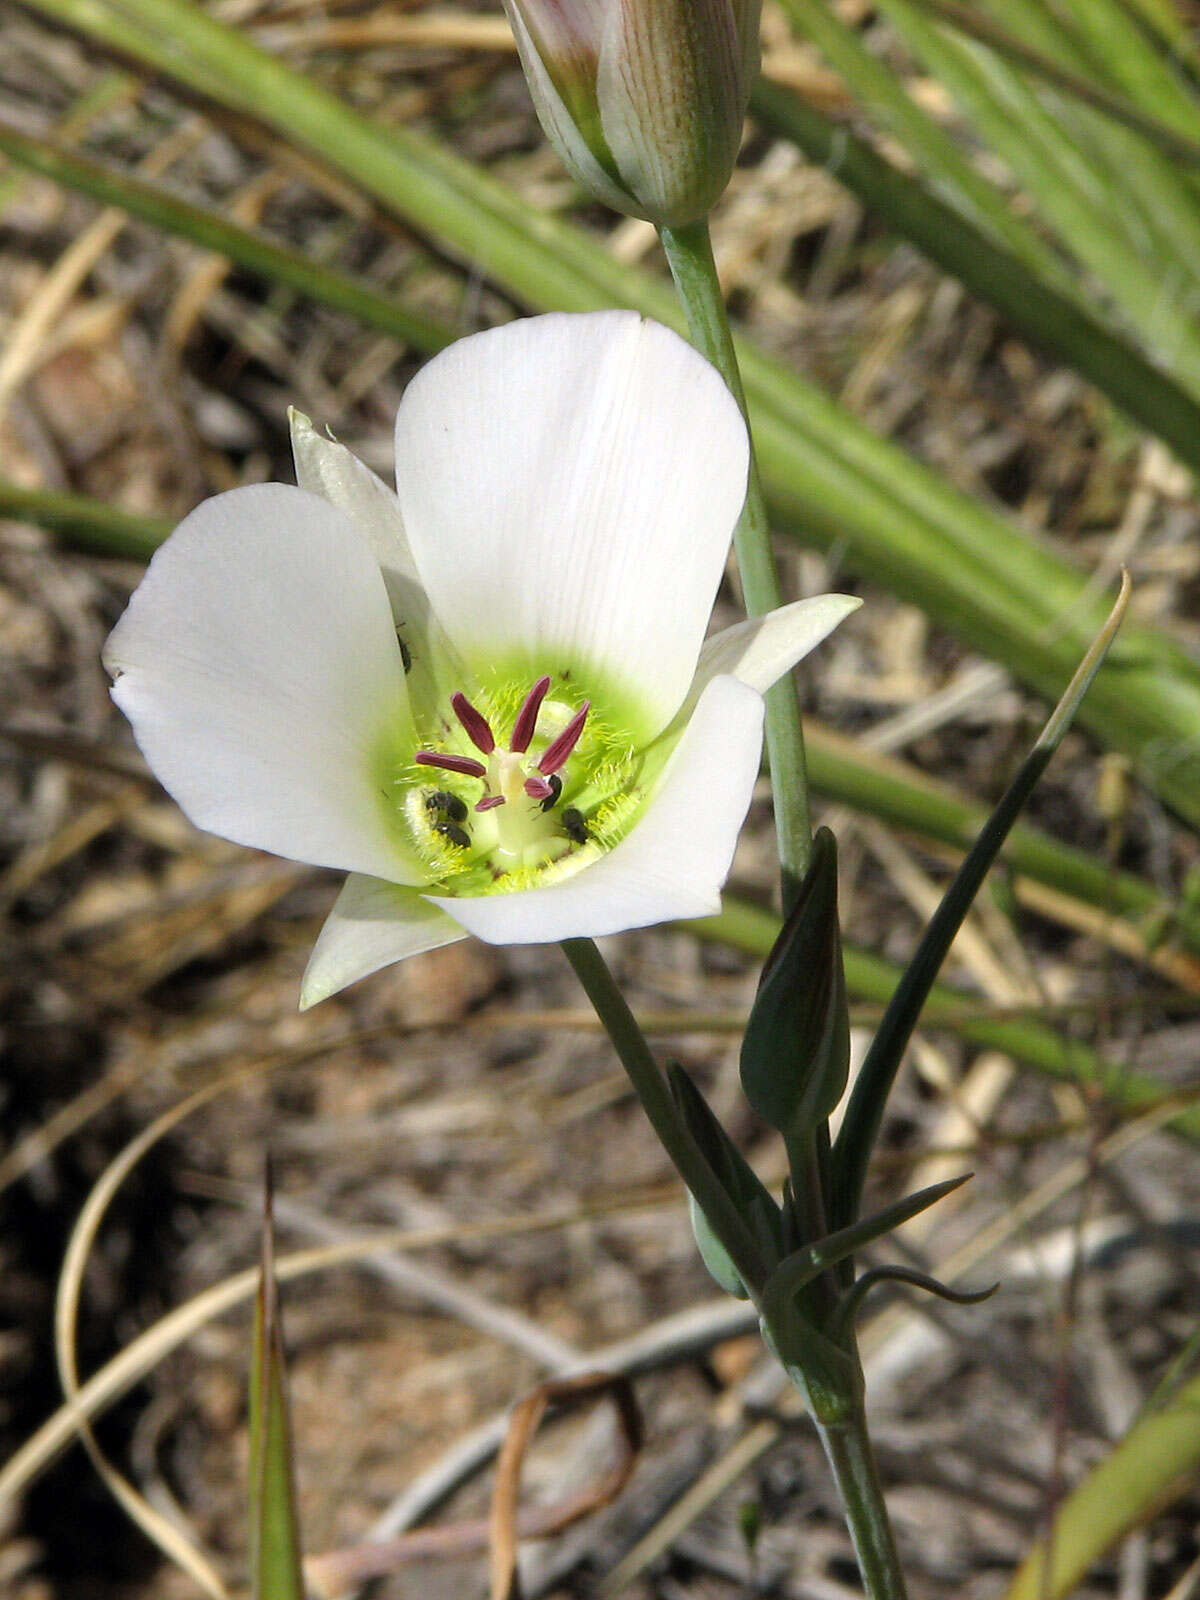 Image of doubting mariposa lily